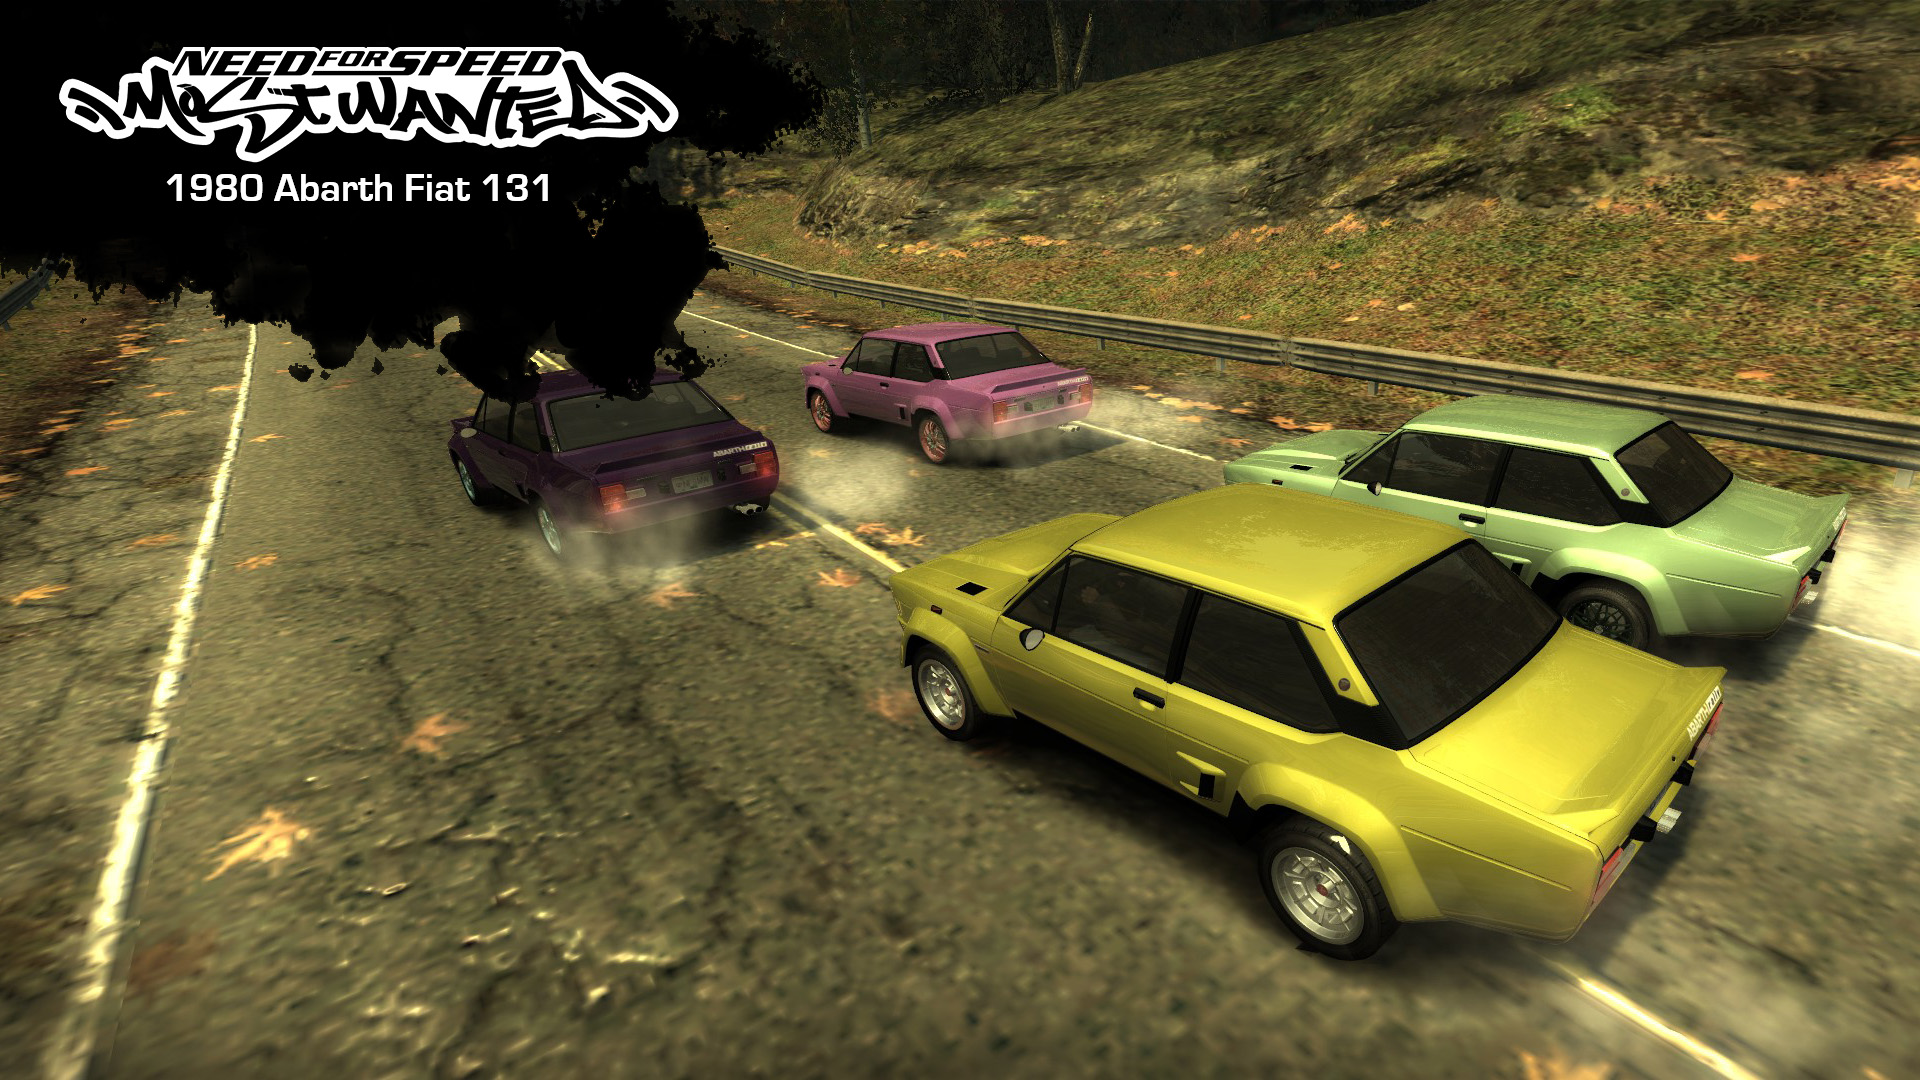 Need For Speed Most Wanted 1980 Abarth Fiat 131 [Add-On]